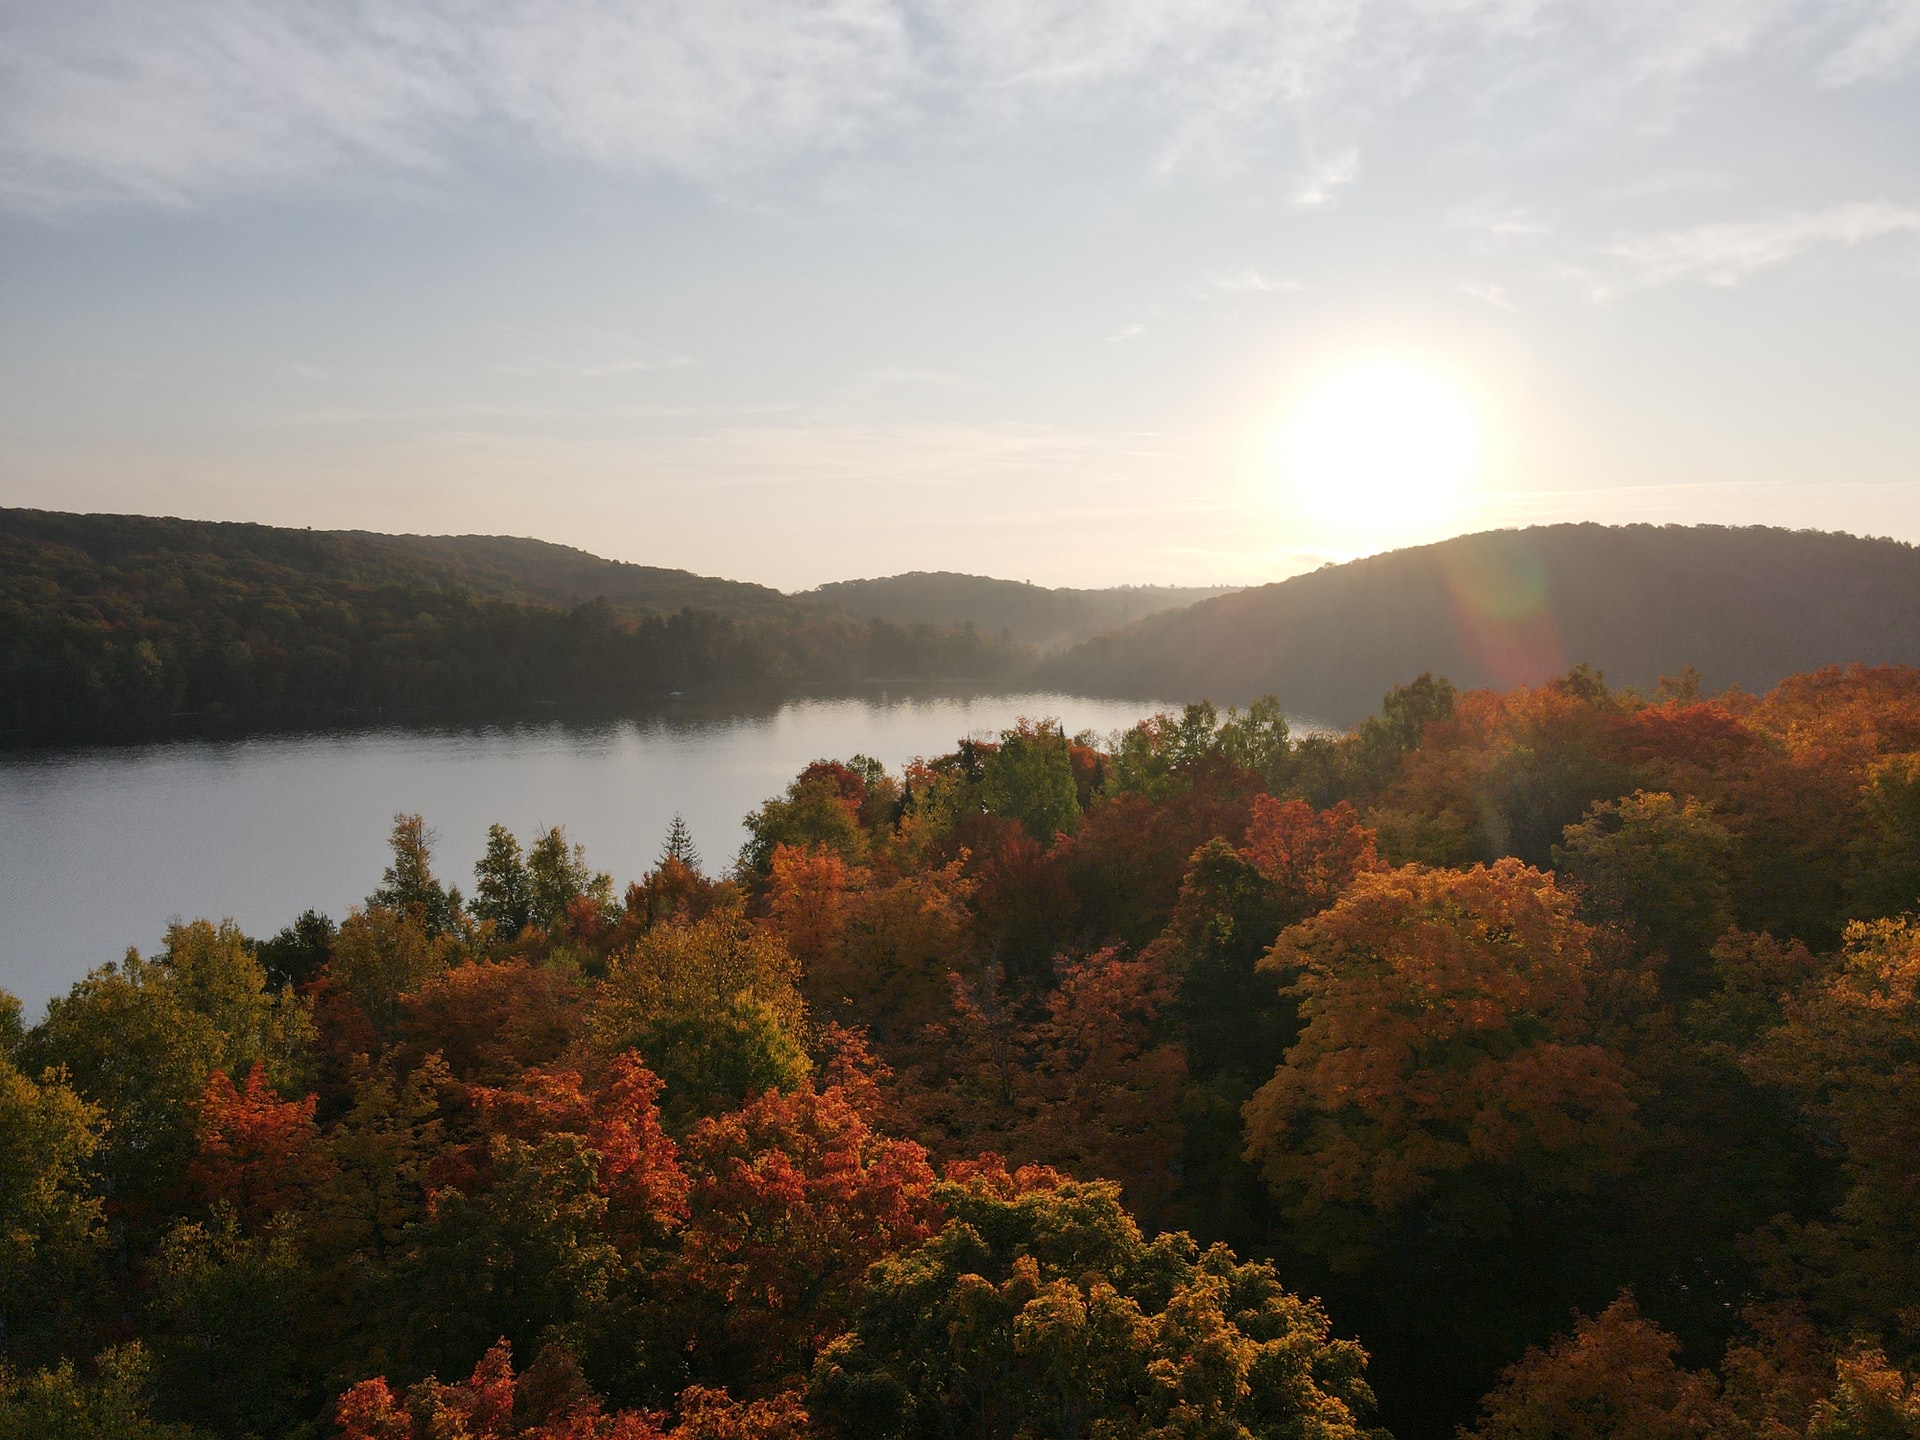 Scenic photo of trees beside a lake displaying autumn colours, hills in background with sun cresting the peak